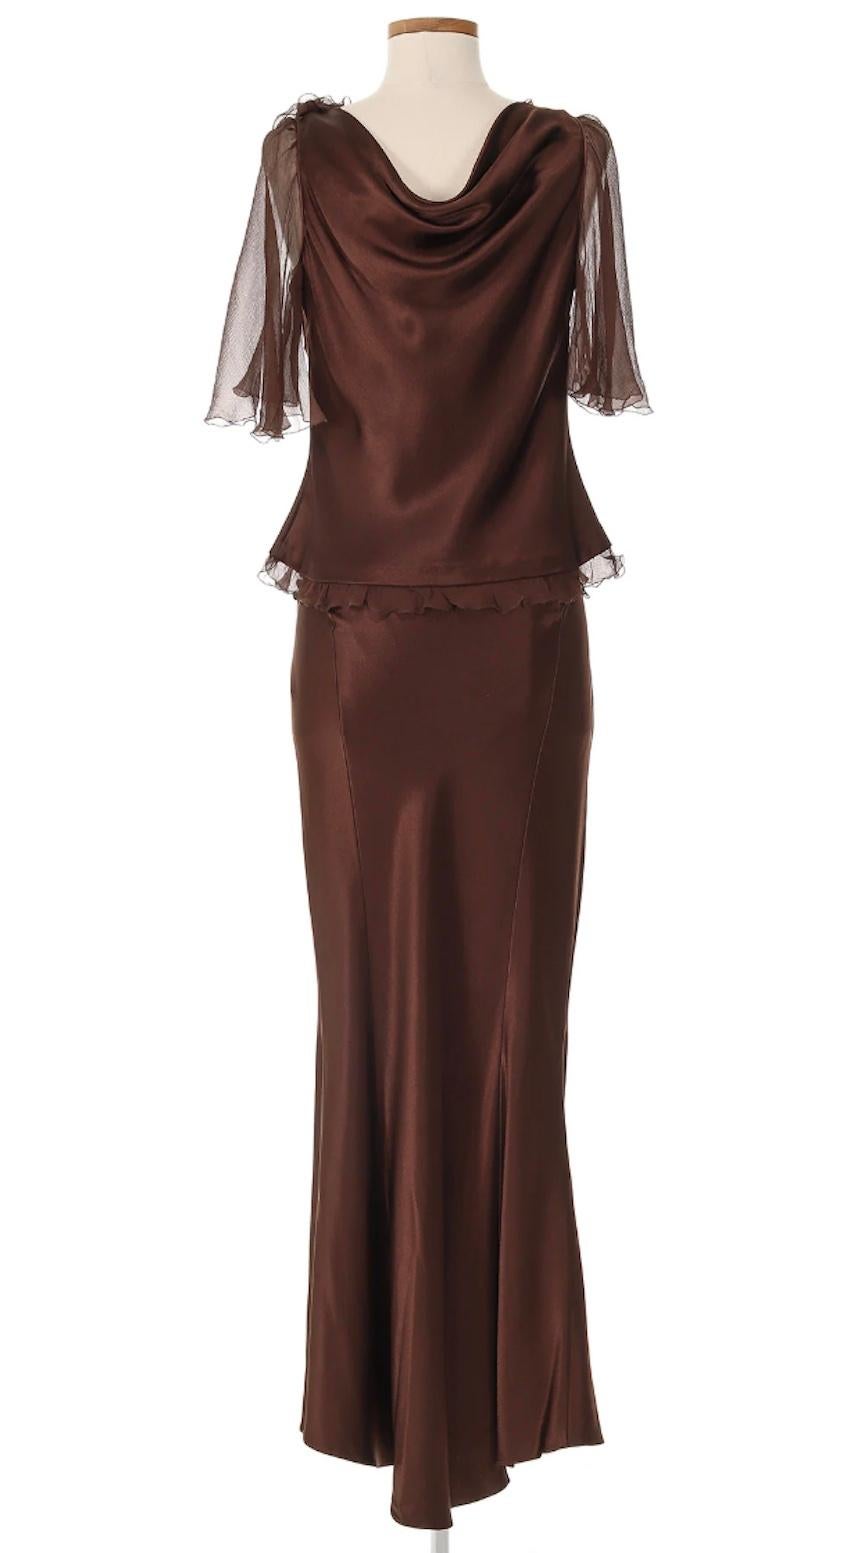 John Galliano Skirt Set in a rich brown silk. This is a luxurius & feminine ensemble that drapes beautifully onto the body. This piece is understated yet glamorous with a timeless appeal.

Top

Shoulders 18 in
Bust 36 in
Waist 31 in
Sleeve 13